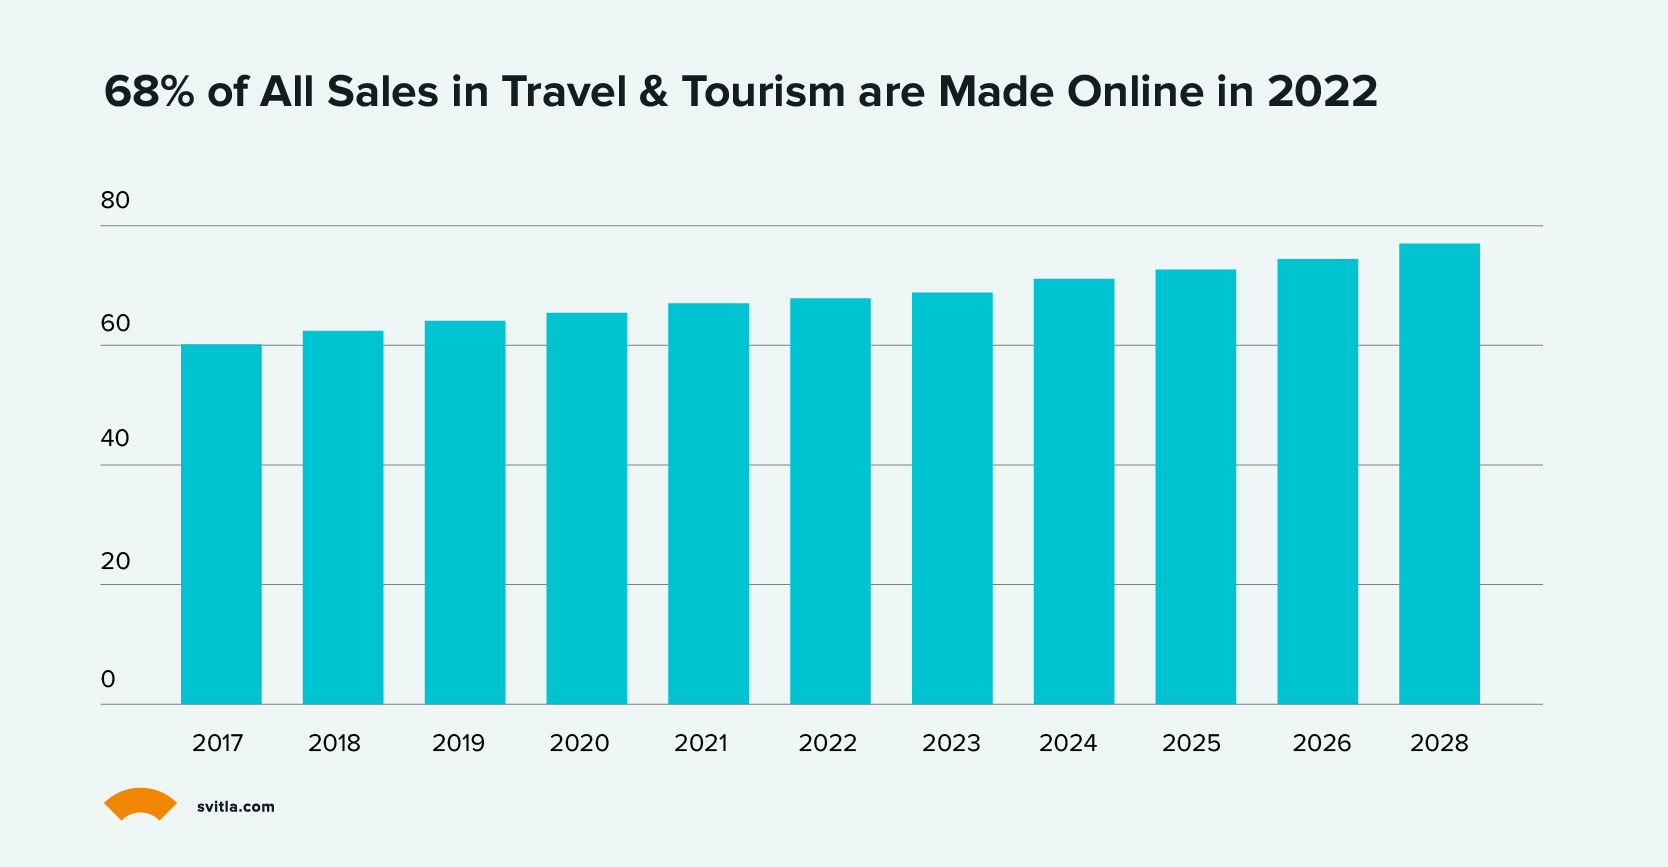 68% of All Sales in Travel & Tourism are Made Online in 2022